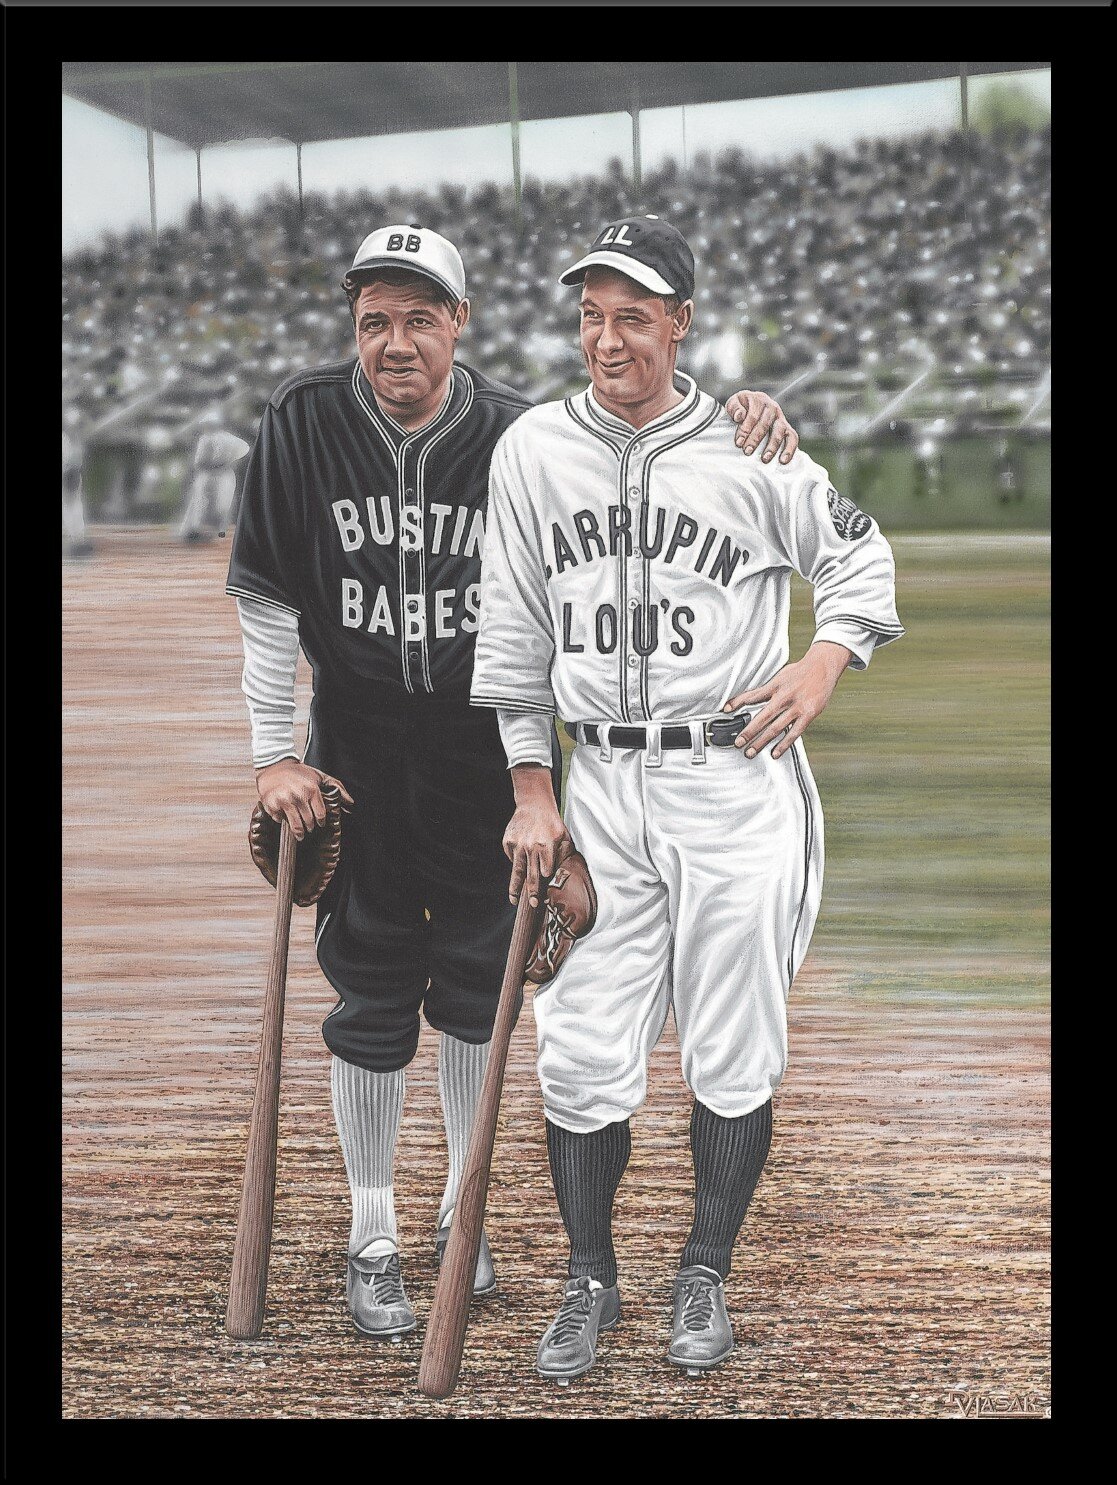 Lou Gehrig and Babe Ruth Colorized  Lou gehrig, Babe ruth, Baseball players